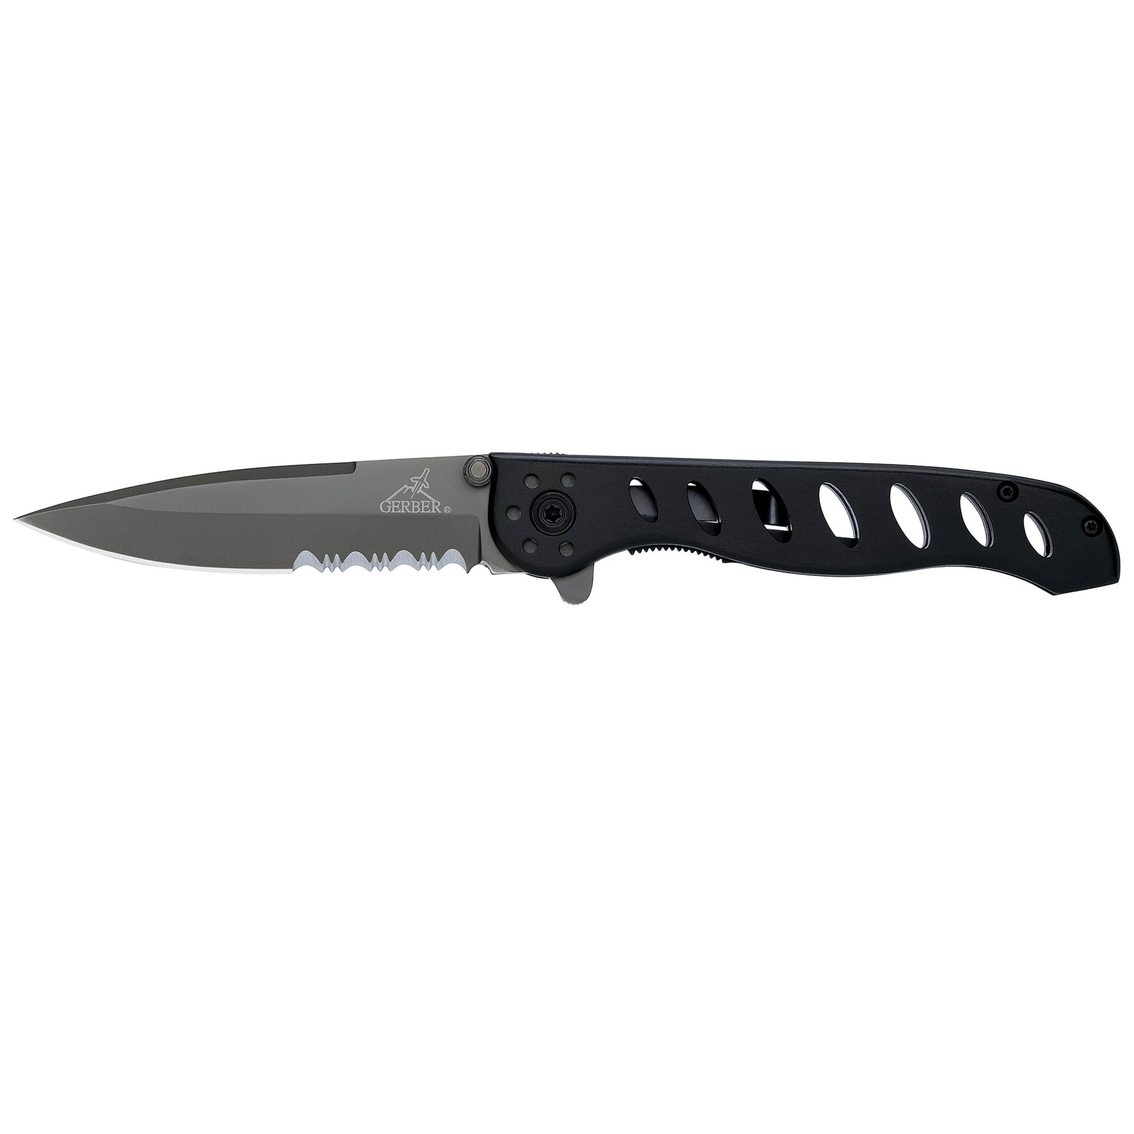 Gerber Knives and Tools Evo 3.0 Blade - Image 2 of 2